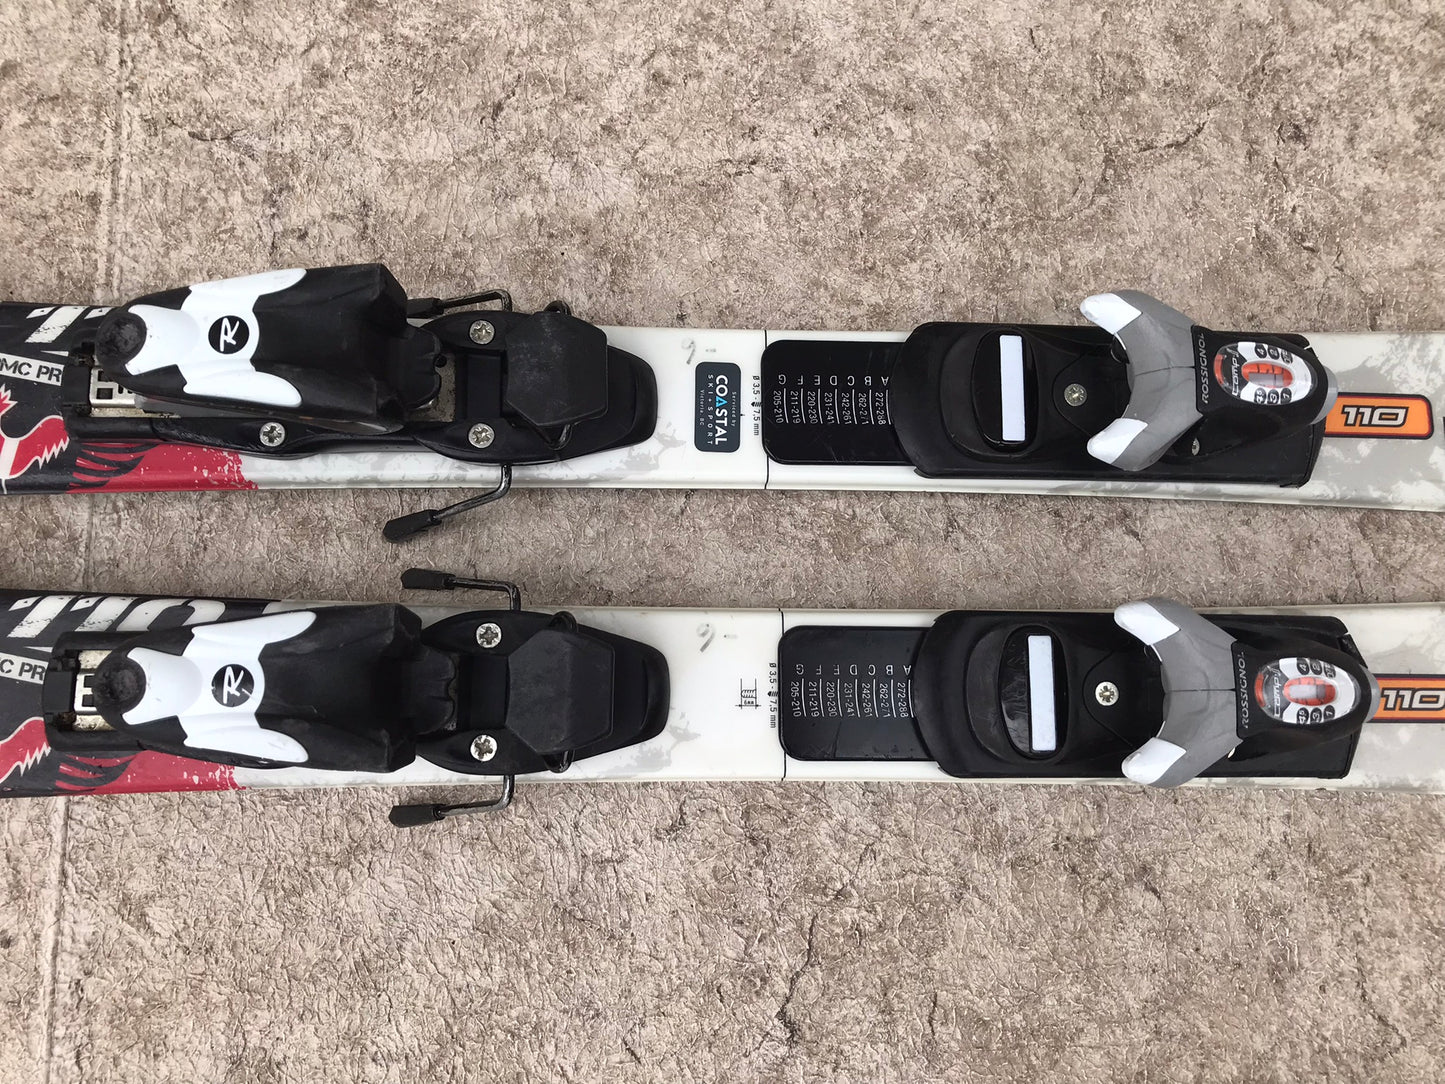 Ski 110 Rossignol Pro J Parabolic White Red Blue With Bindings Excellent